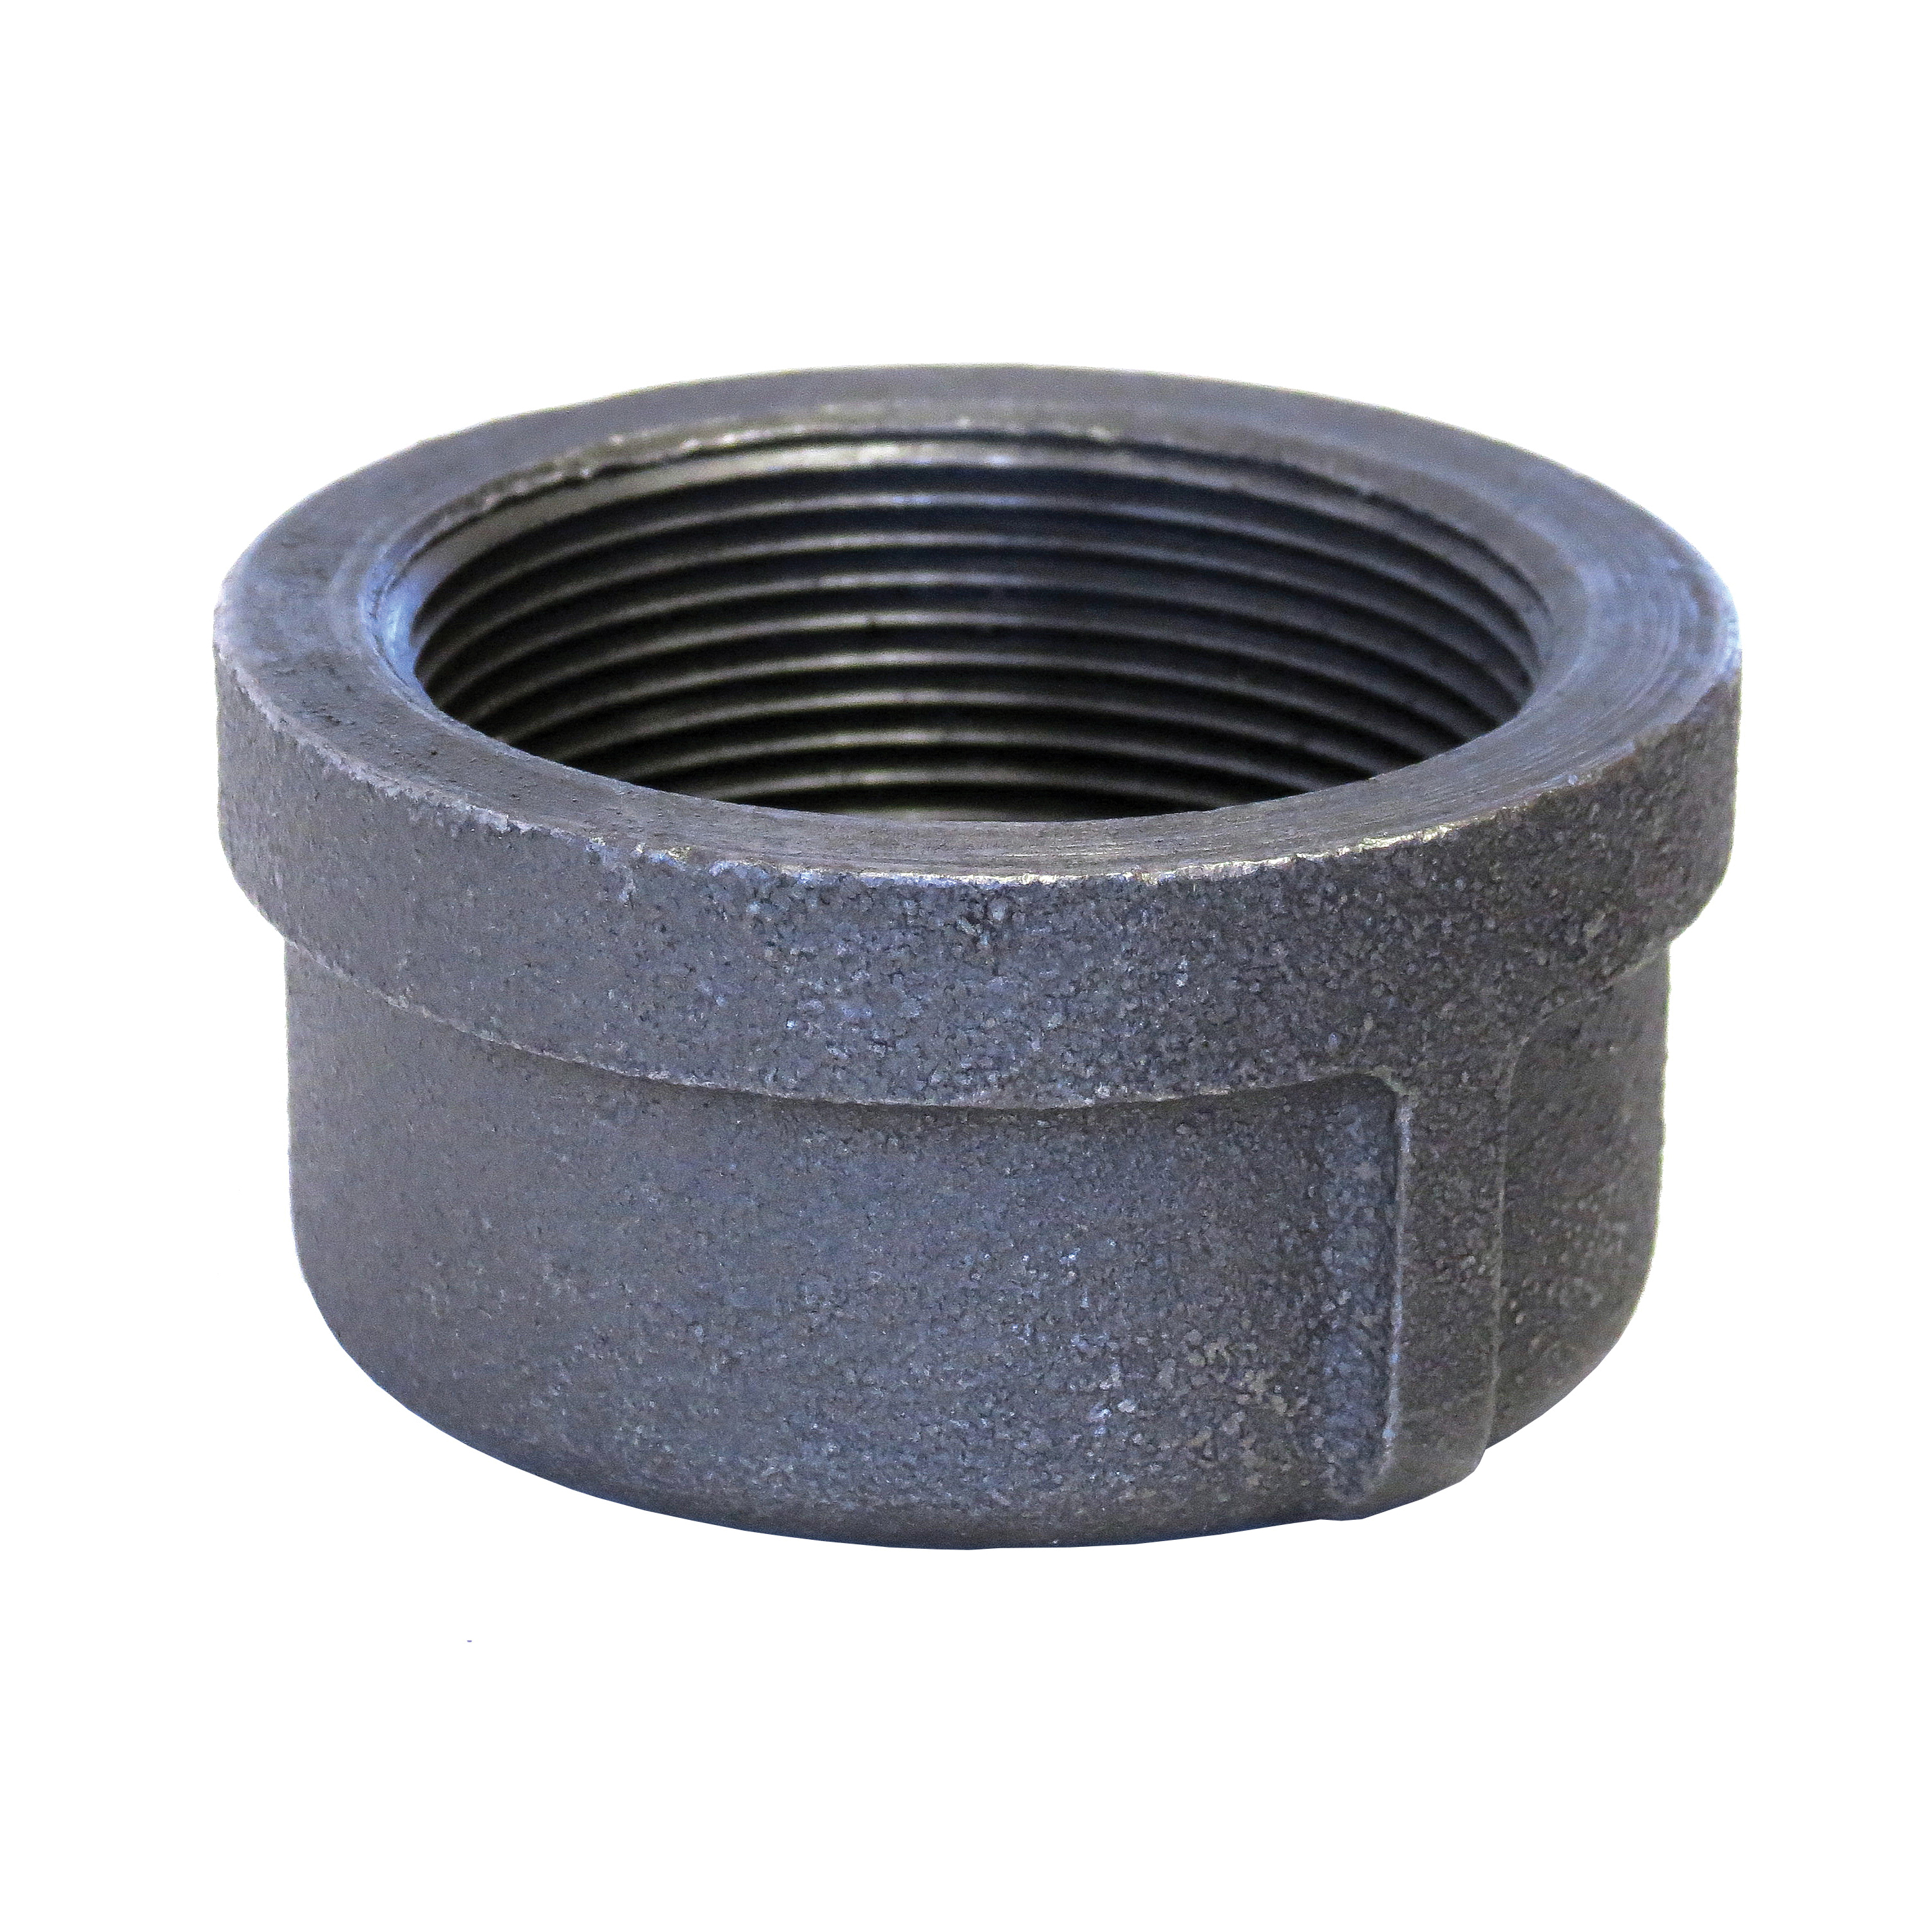 Anvil® 0319900767 FIG 1124 Standard Pipe Cap, 2-1/2 in Nominal, FNPT End Style, 150 lb, Malleable Iron, Galvanized, Domestic